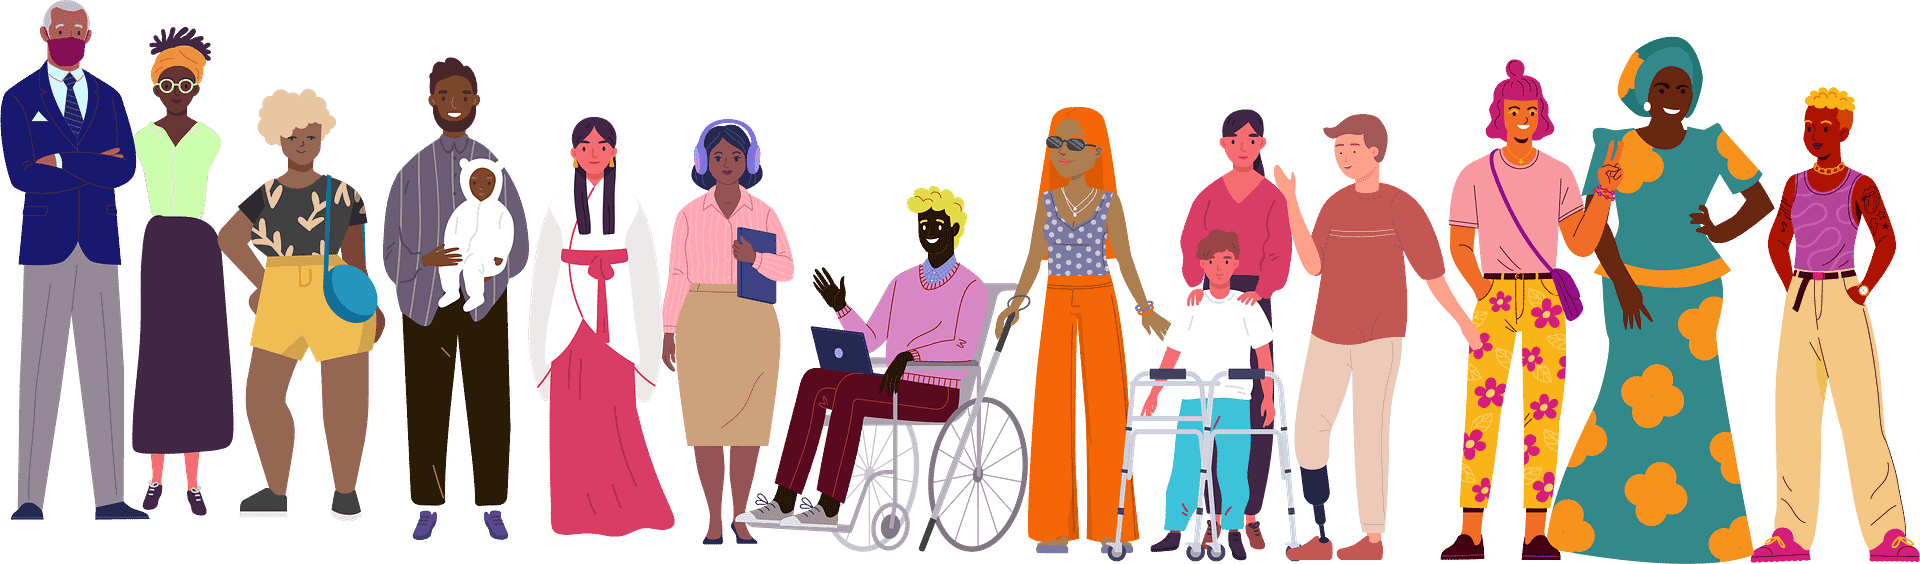 Illustrations of a second set of 15 diverse disabled people, with vibrant diversity in race, age, gender, culture, type of disability, size, and clothing choices.